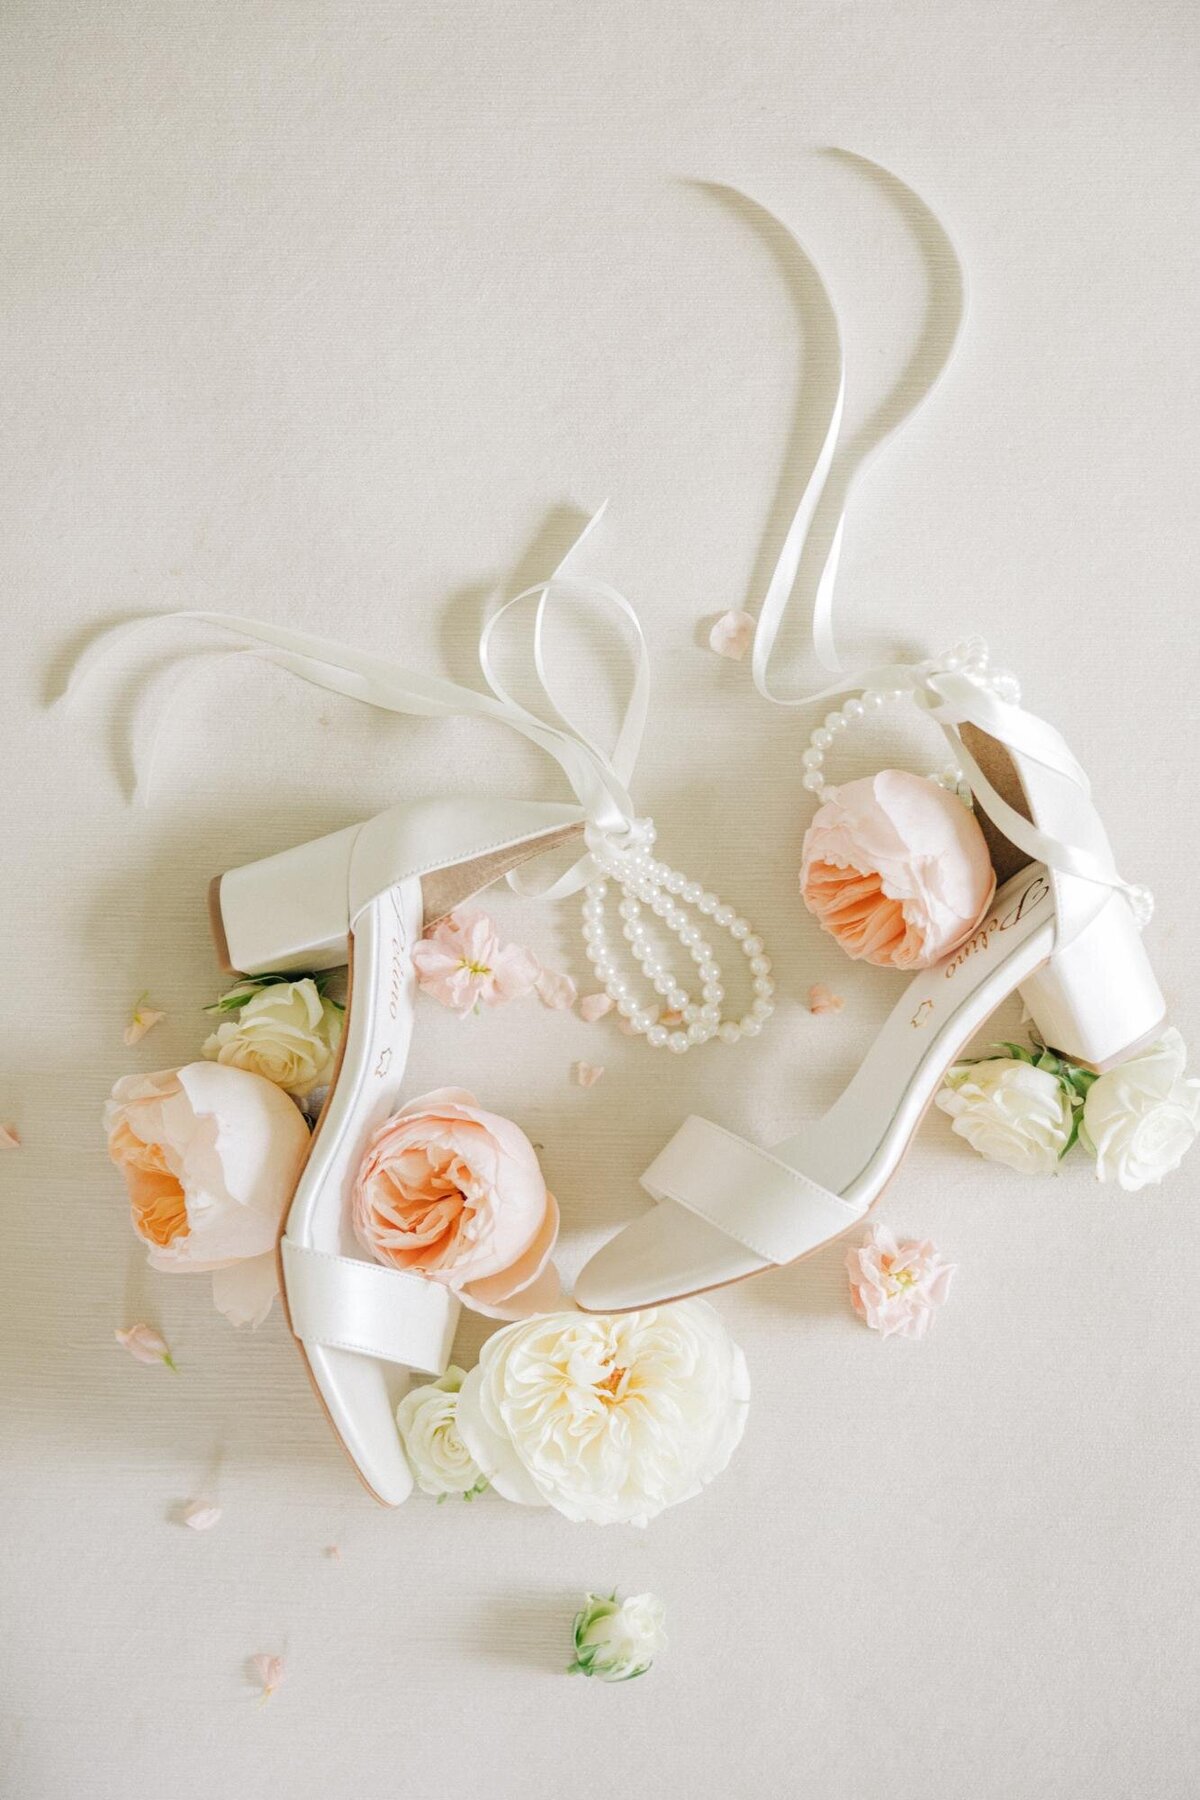 A pair of white bridal heels adorned with flowers and pearls arranged on a plain background.